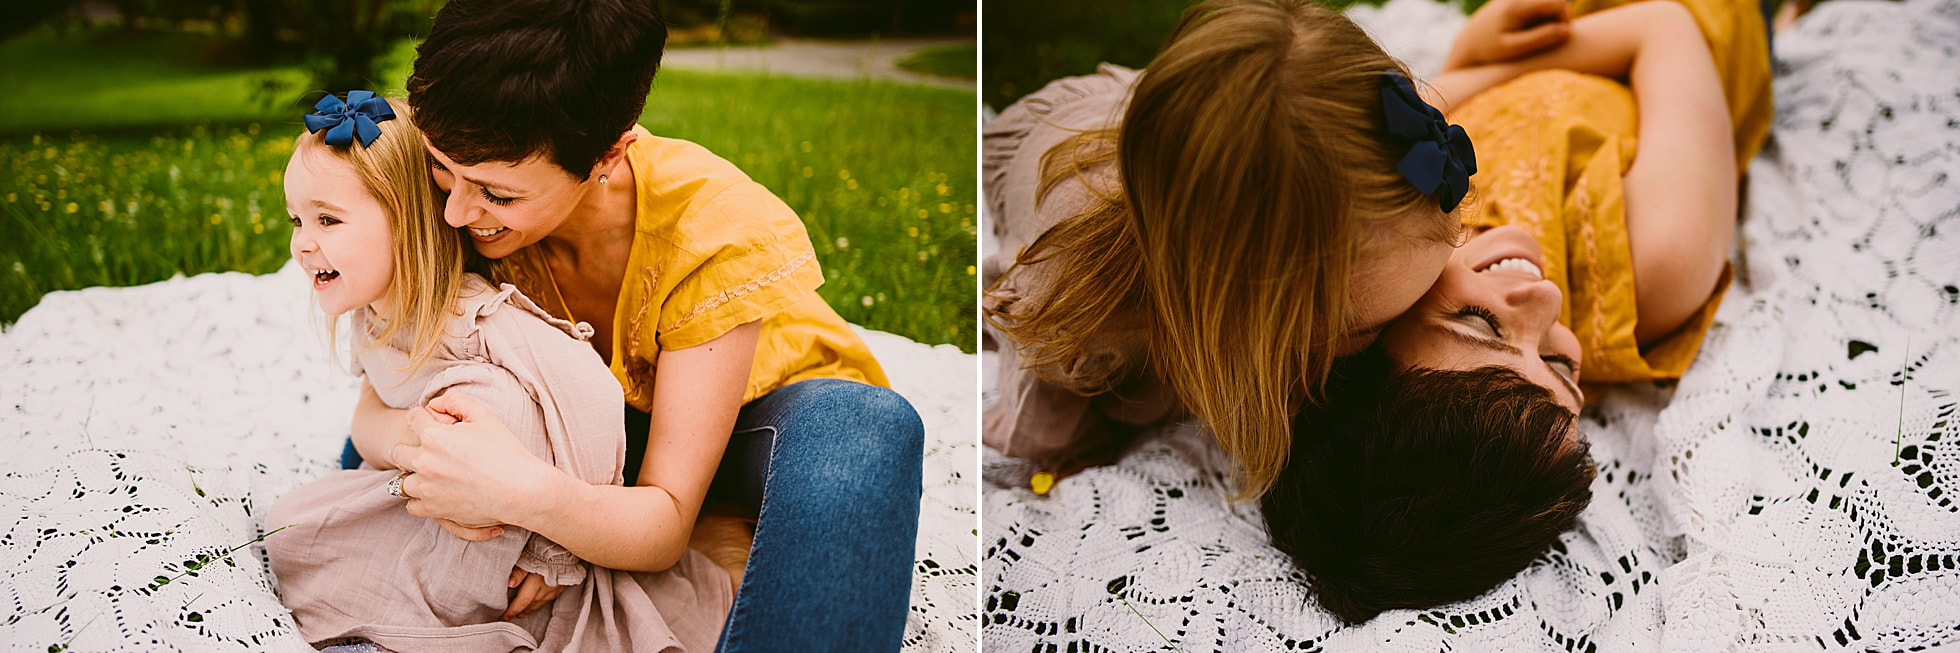 A mother-daughter session featuring clothing from The Golden Shoestring in Roanoke, Virginia